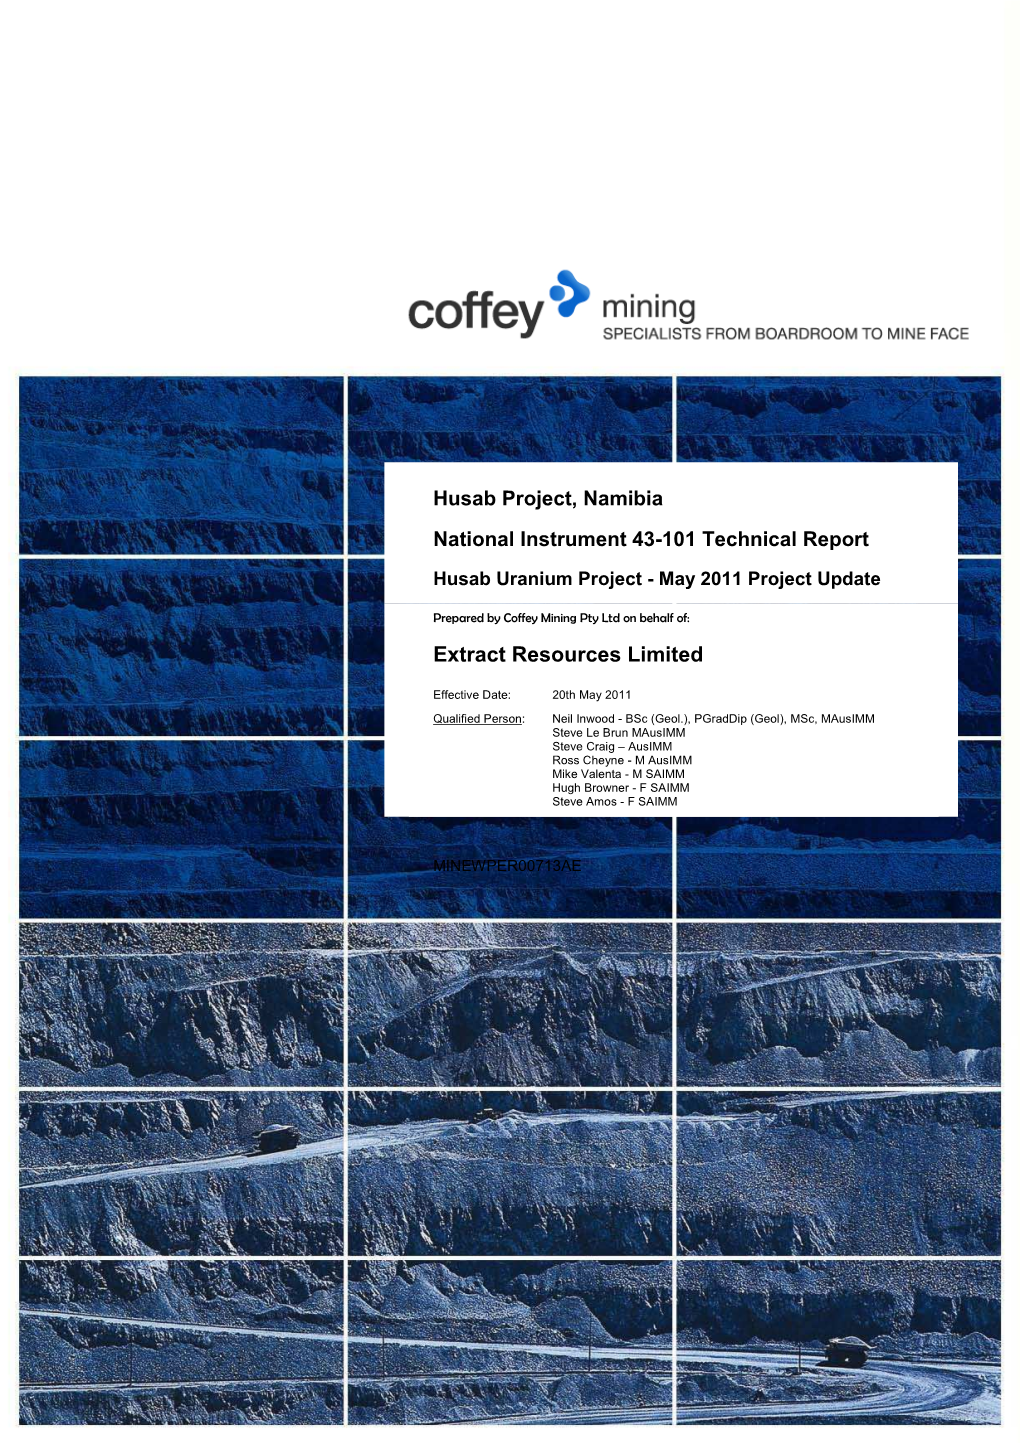 Husab Project, Namibia National Instrument 43-101 Technical Report